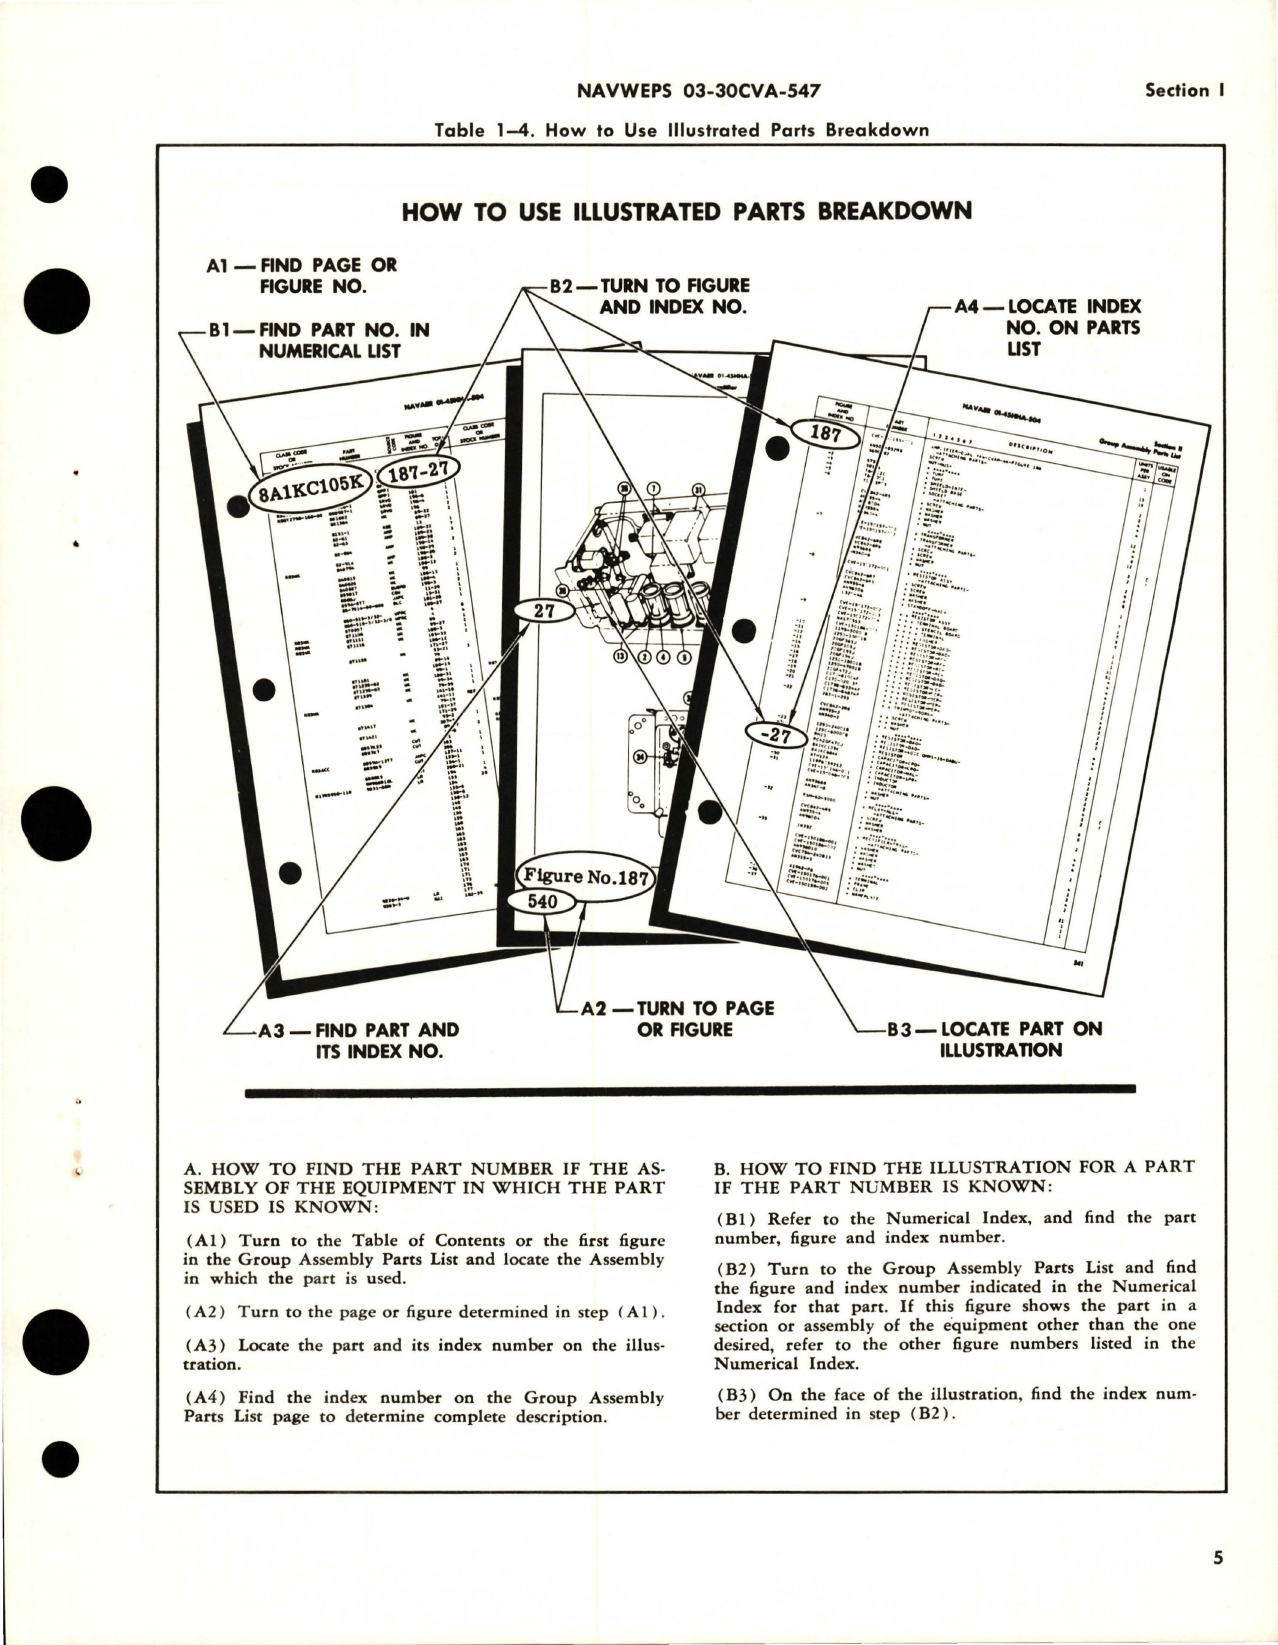 Sample page 7 from AirCorps Library document: Illustrated Parts Breakdown for Rudder Power Control, Cylinder and Valve Assembly, Rigging and Synchronization Fixtures